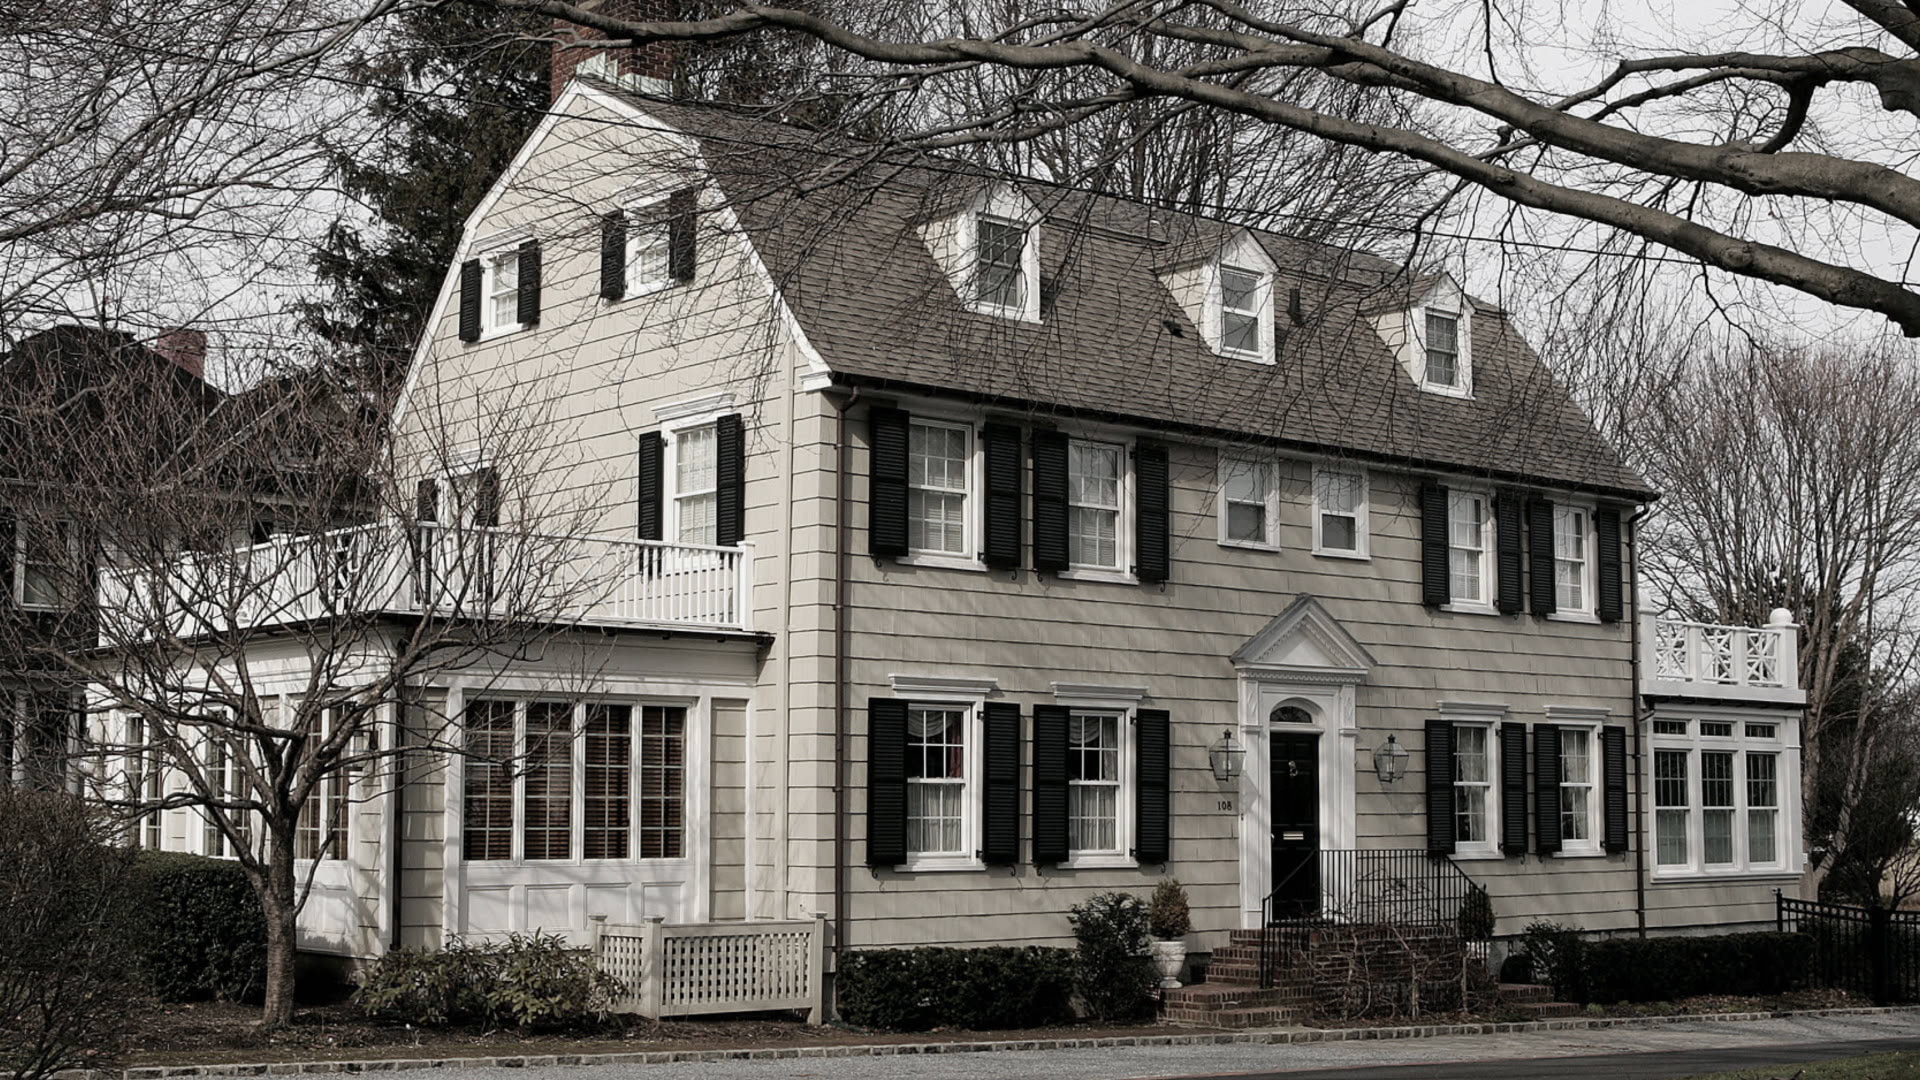 The brutal truth about Amityville: It wasn't ghosts but something worse |  U.S. | EL PAÍS English